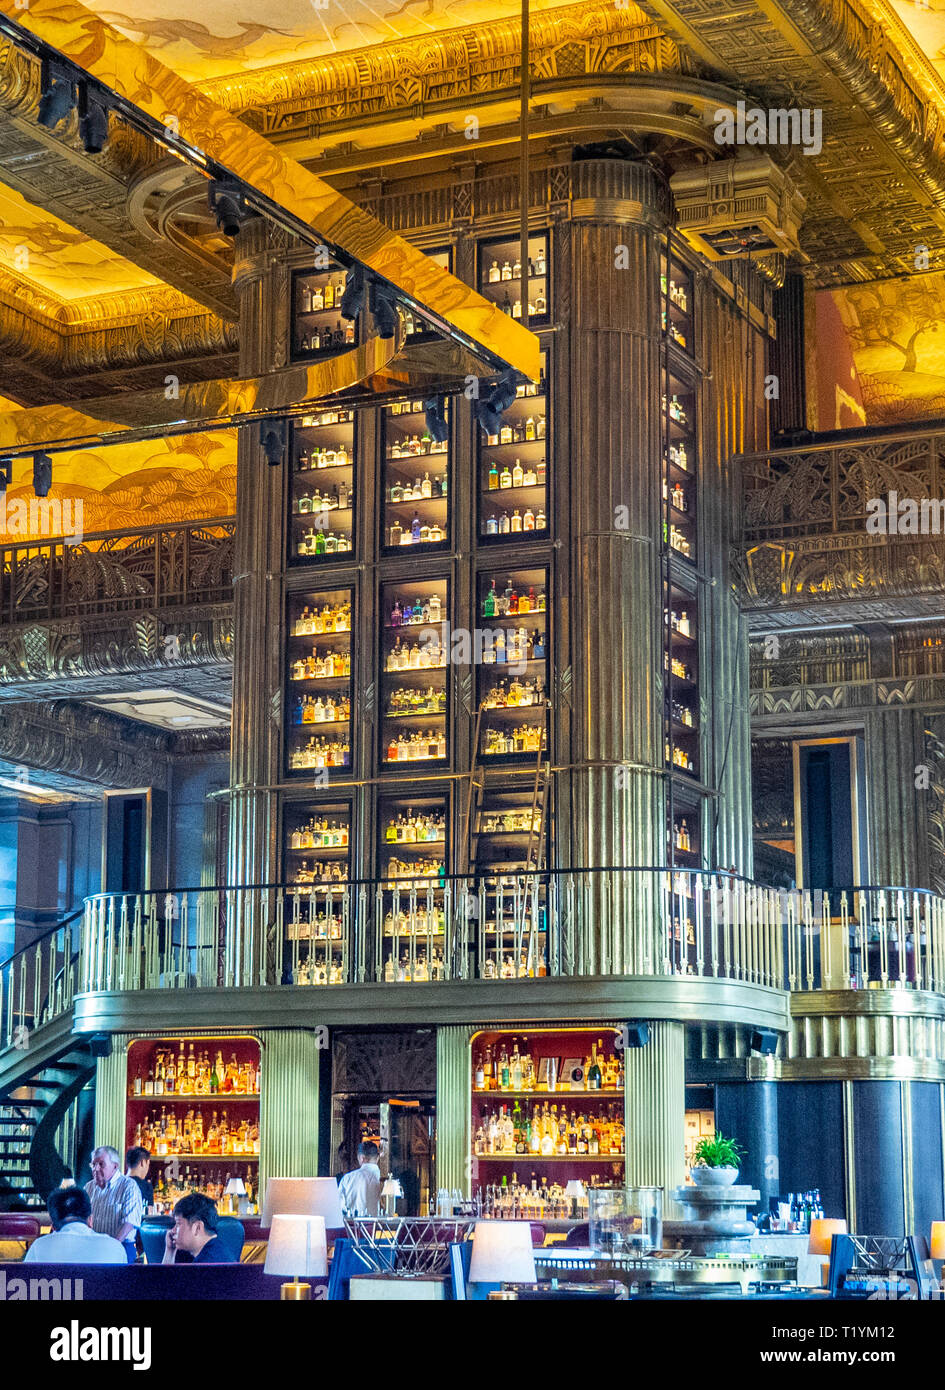 Tall Cabinet Or Gin Tower With Glass And Carved Wooden Columns The